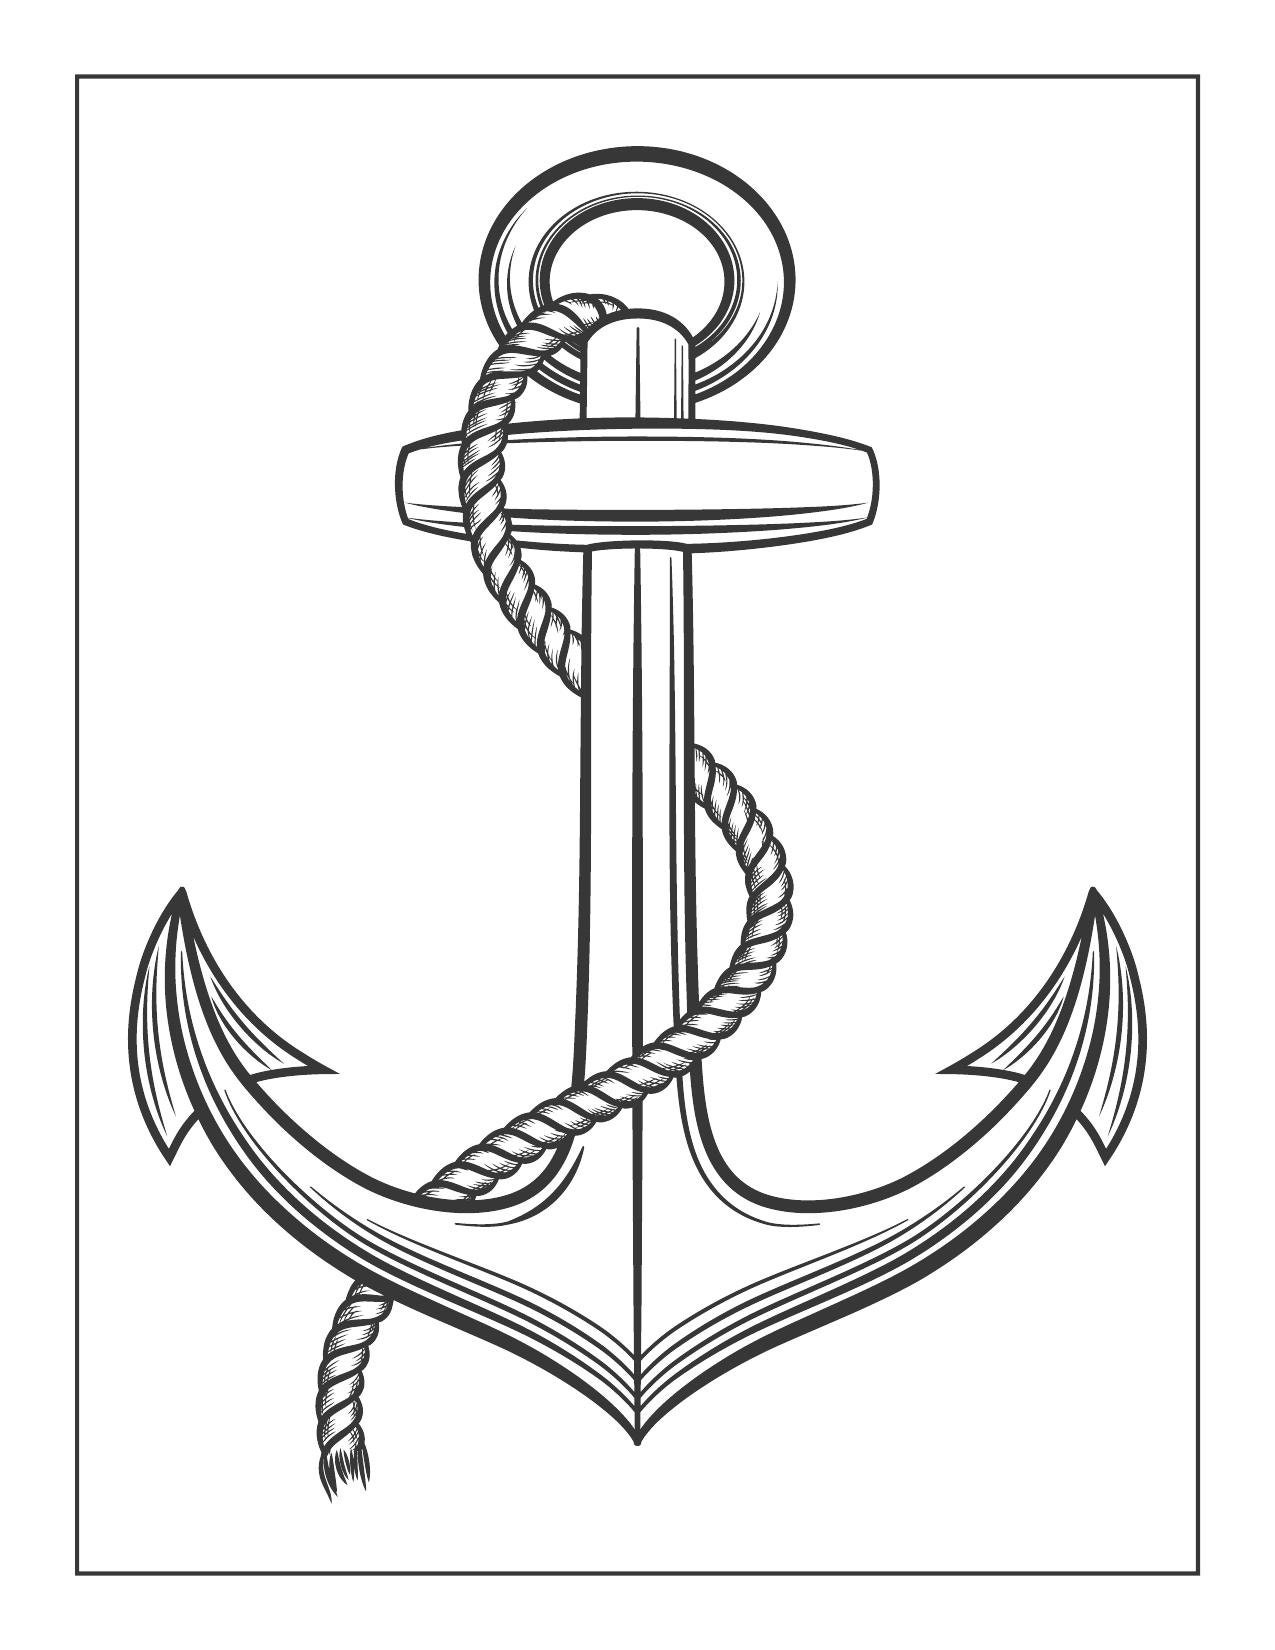 Coloring Book Pages Anchor 20 Different Designs Kids / - Etsy